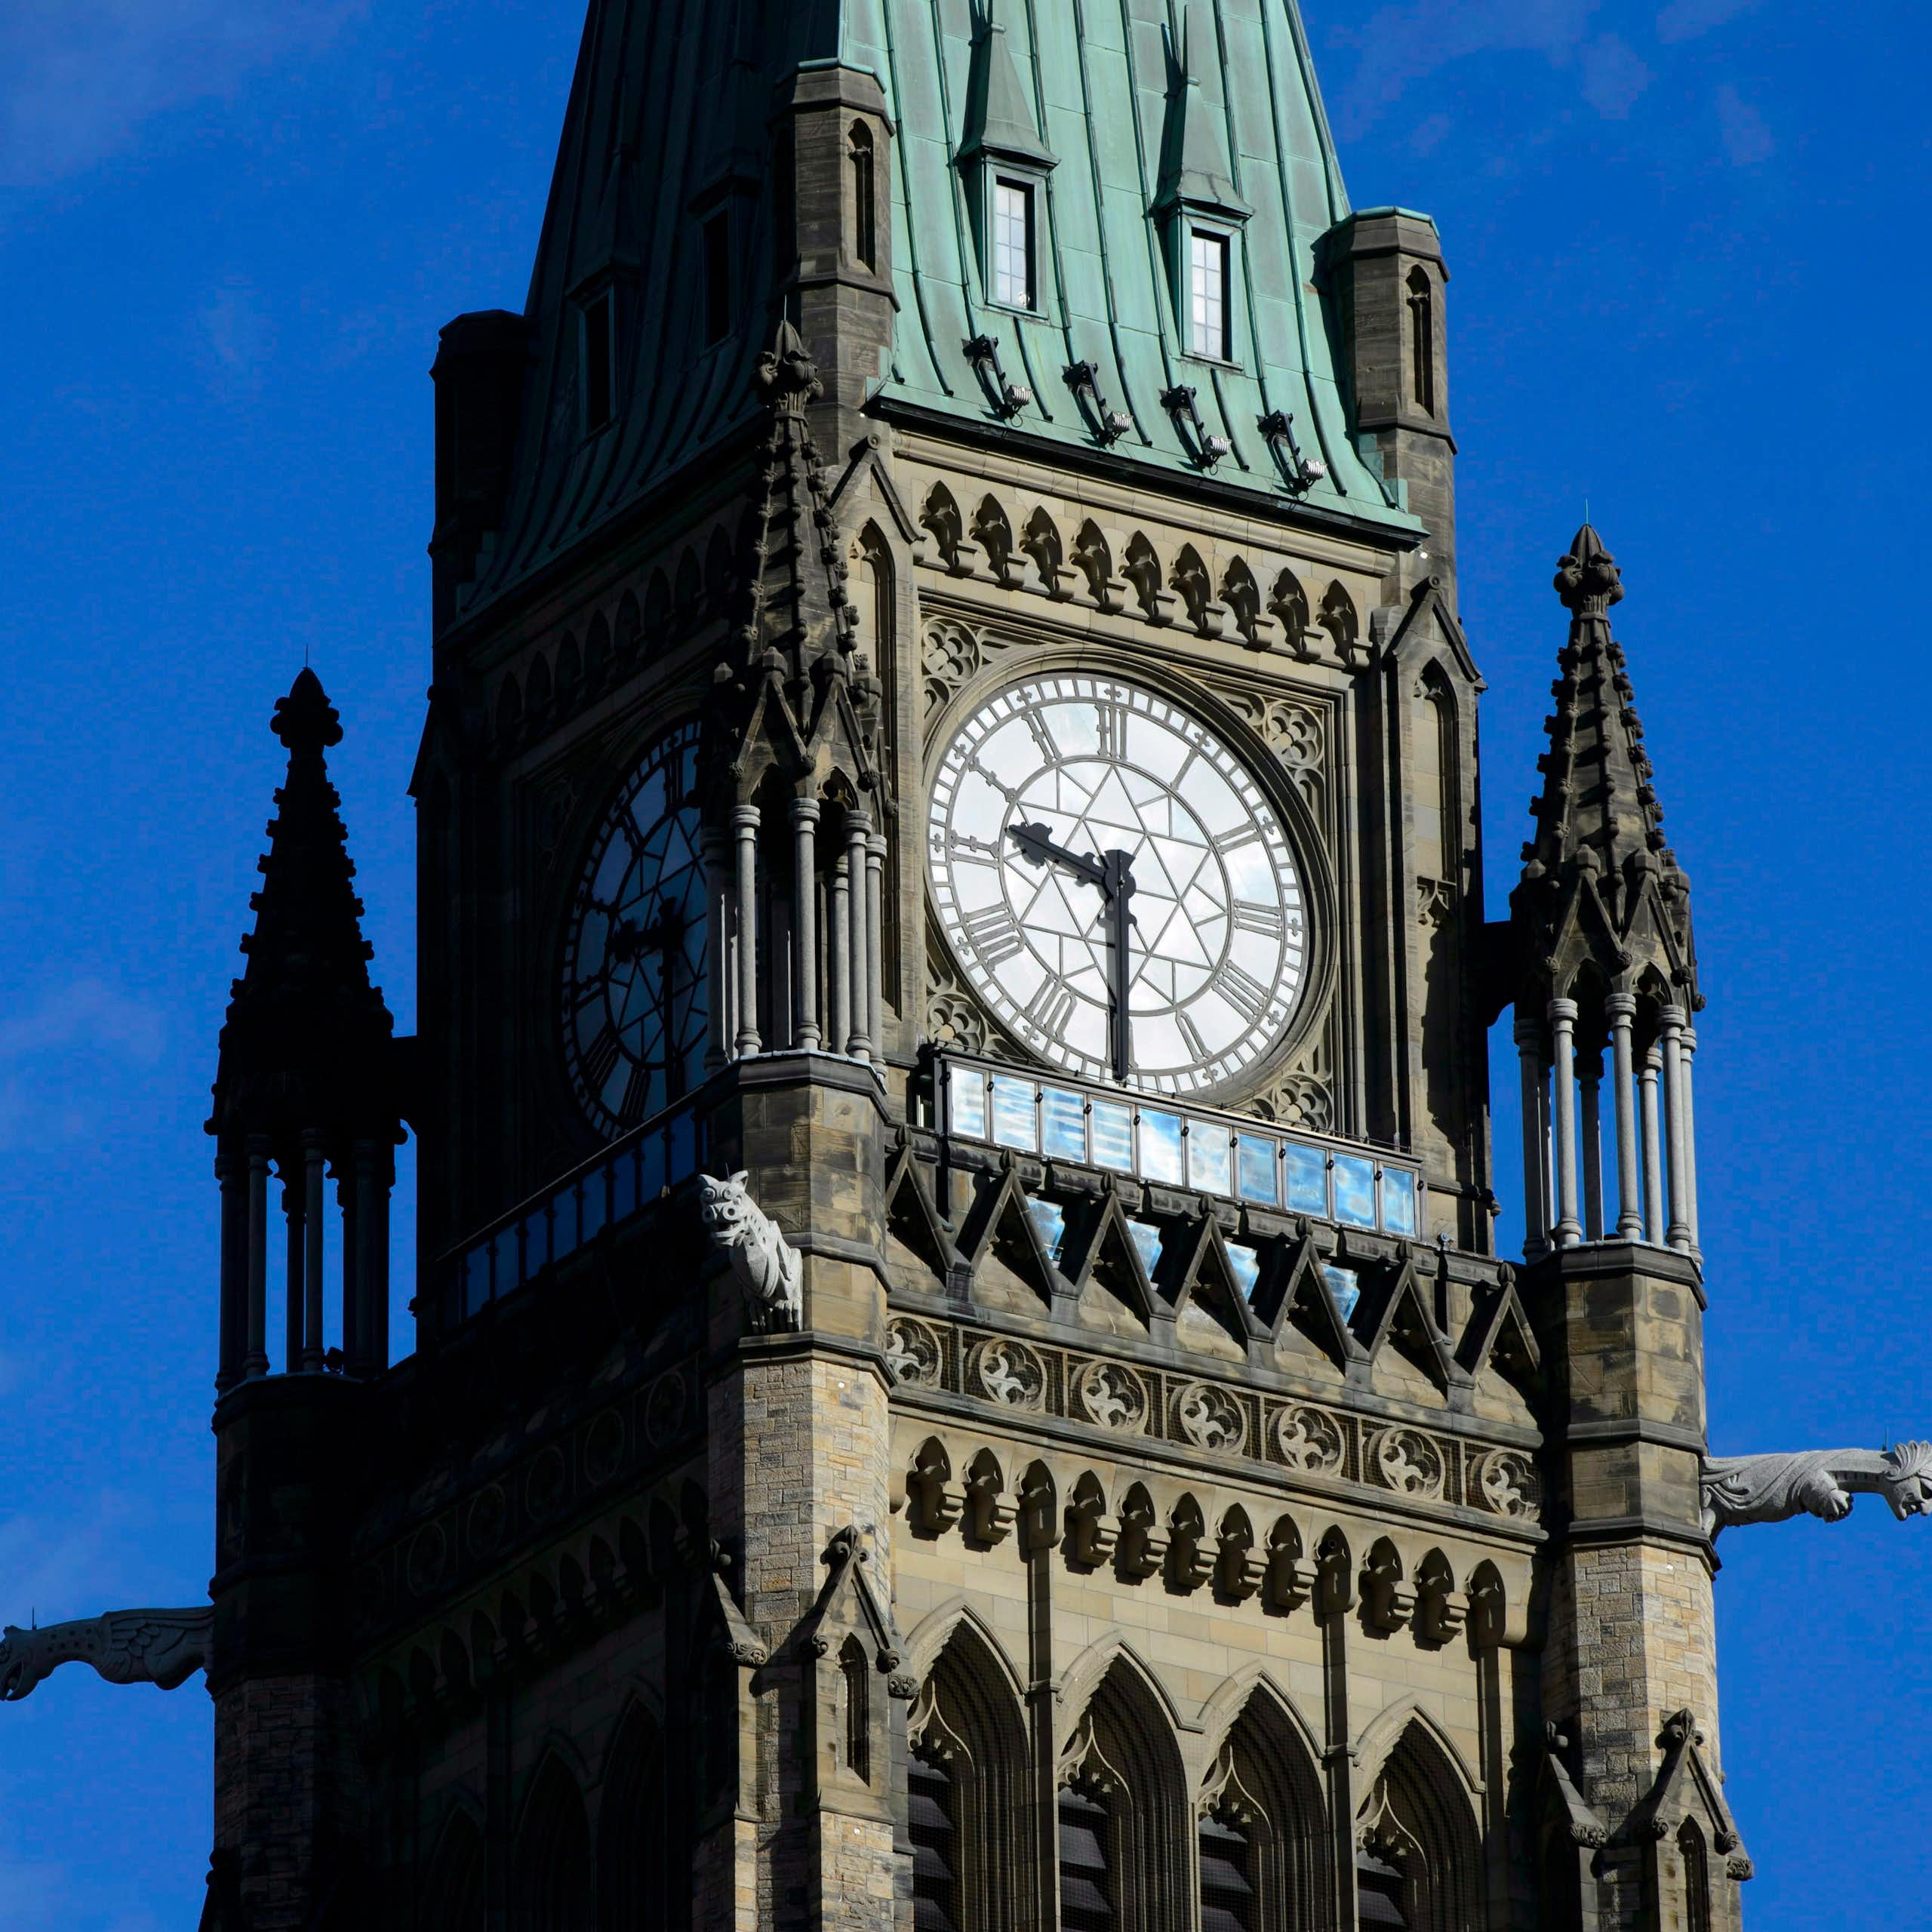 A close up shot of the clock face of a tower